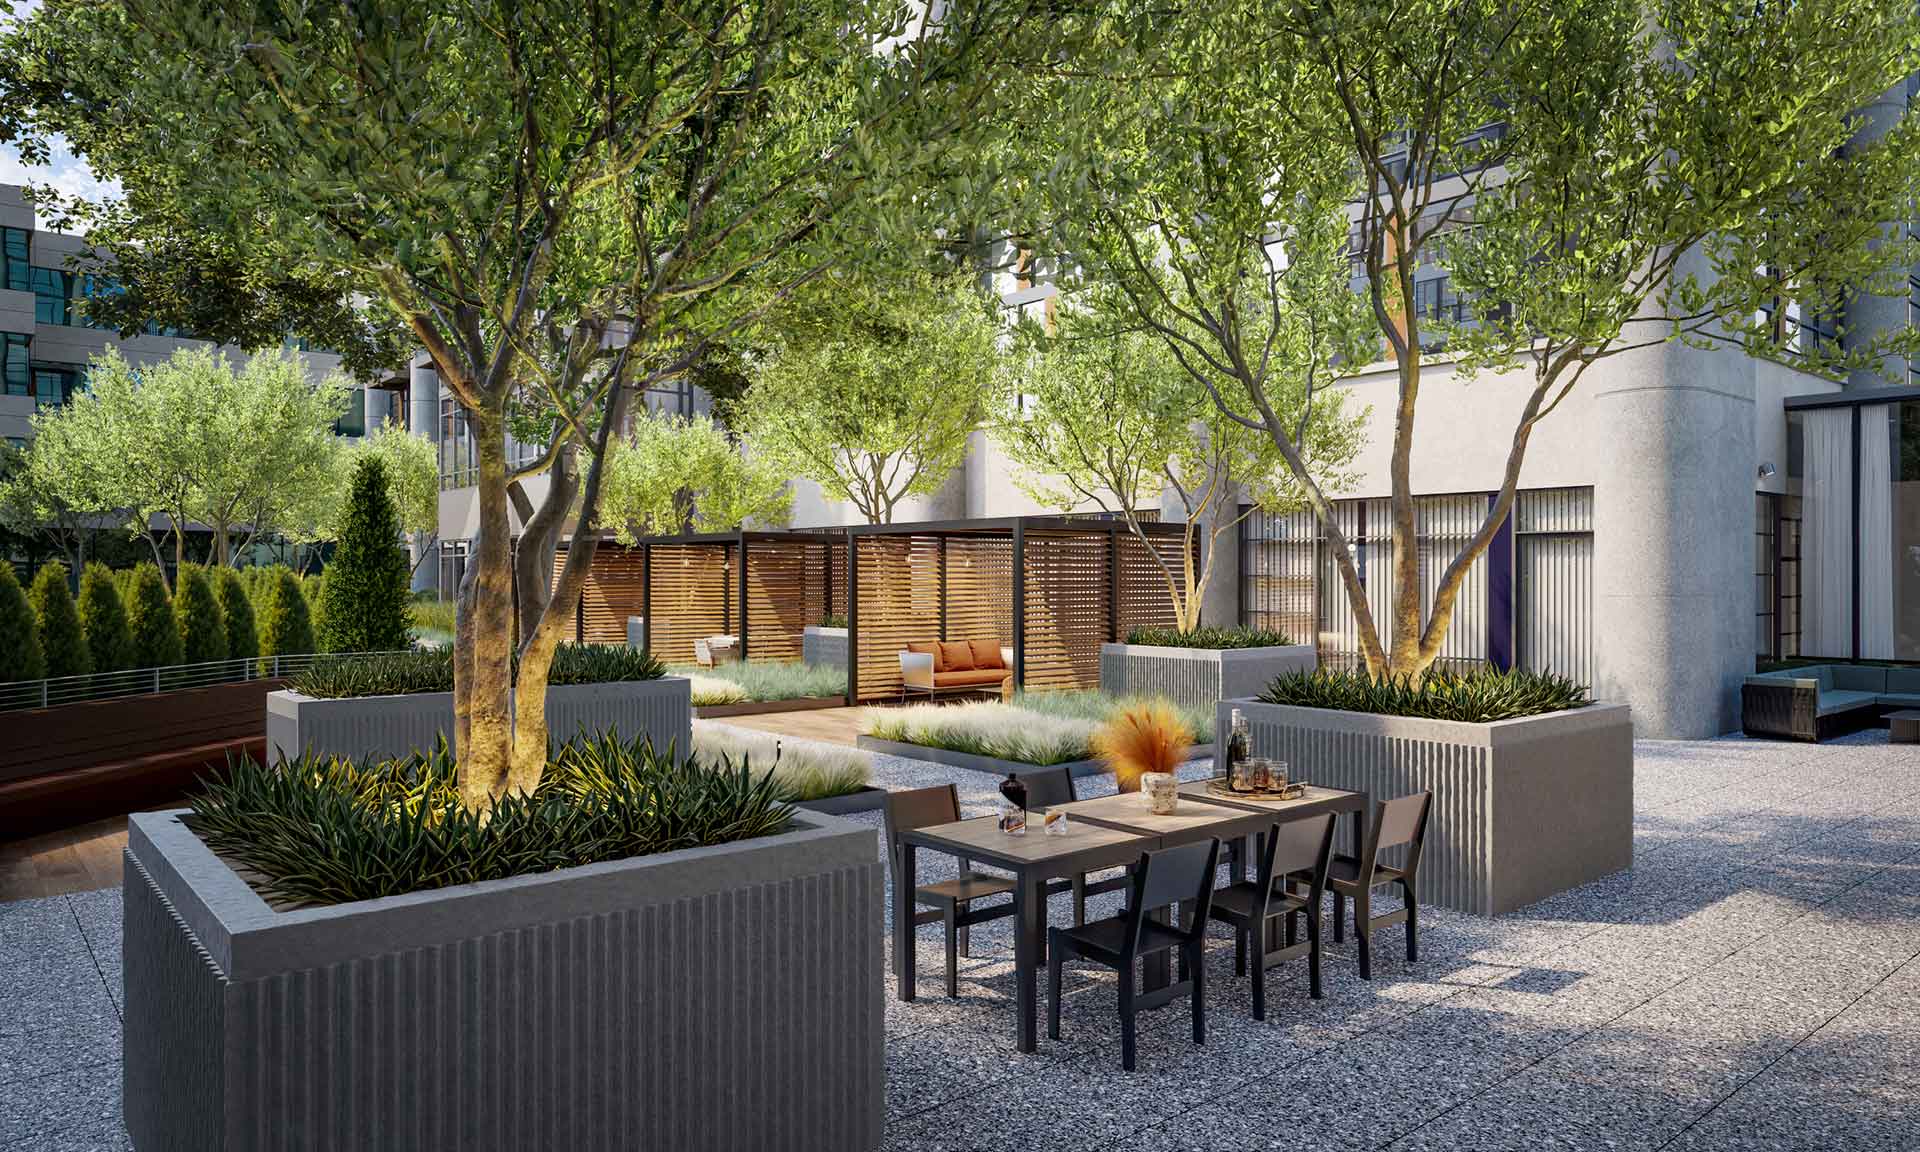 Private cabana lounges adjacent to grilling stations and lush landscaping